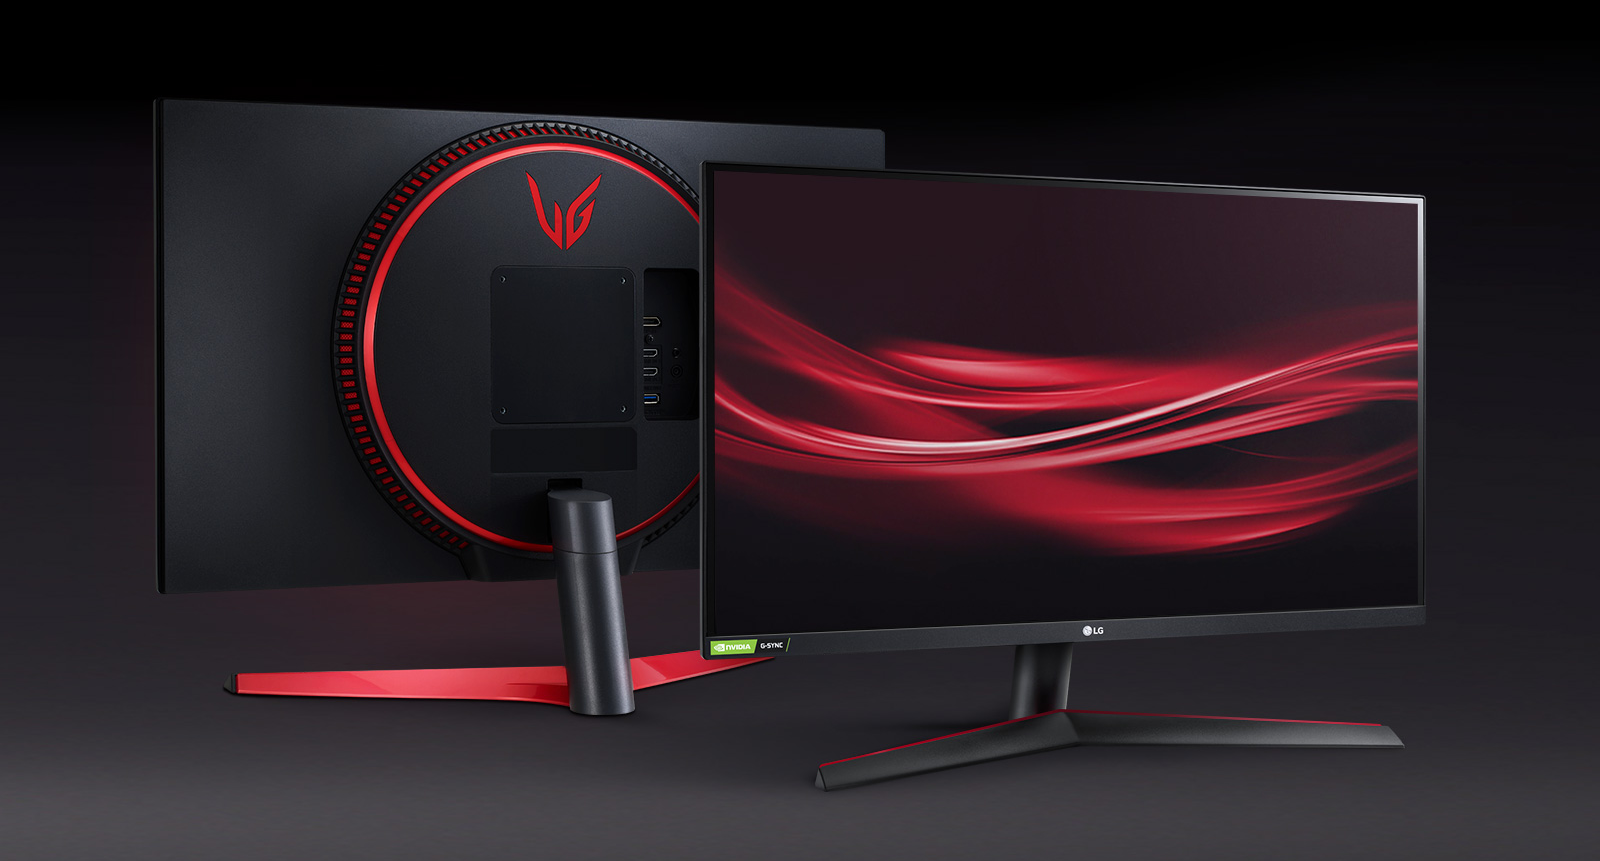 LG UltraGear 27GN800-B: 27-inch and WQHD gaming monitor with NVIDIA G-Sync,  AMD FreeSync Premium and 144 Hz support announced -  News